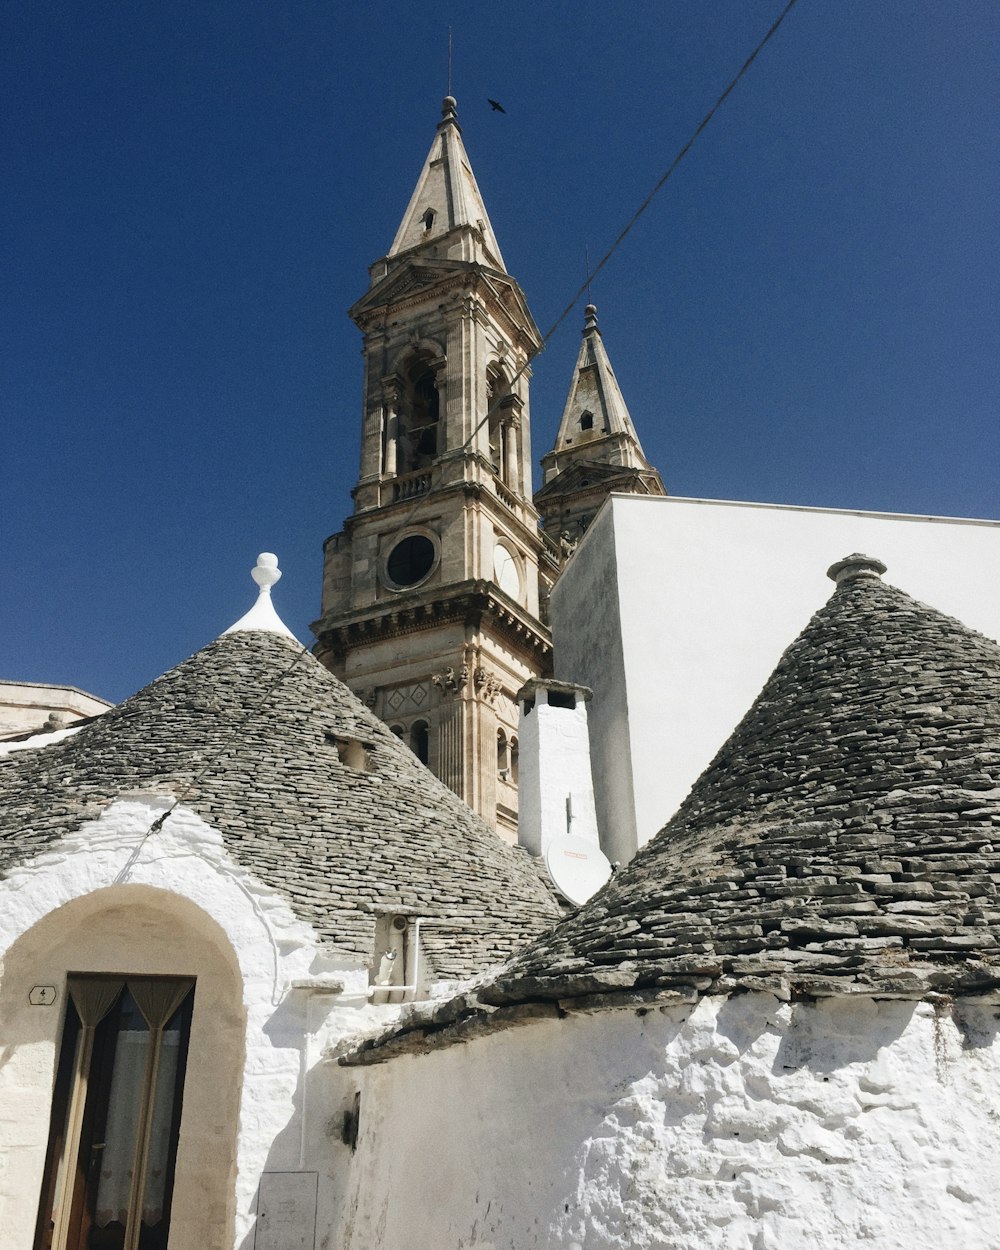 white and brown concrete church under blue sky during daytime